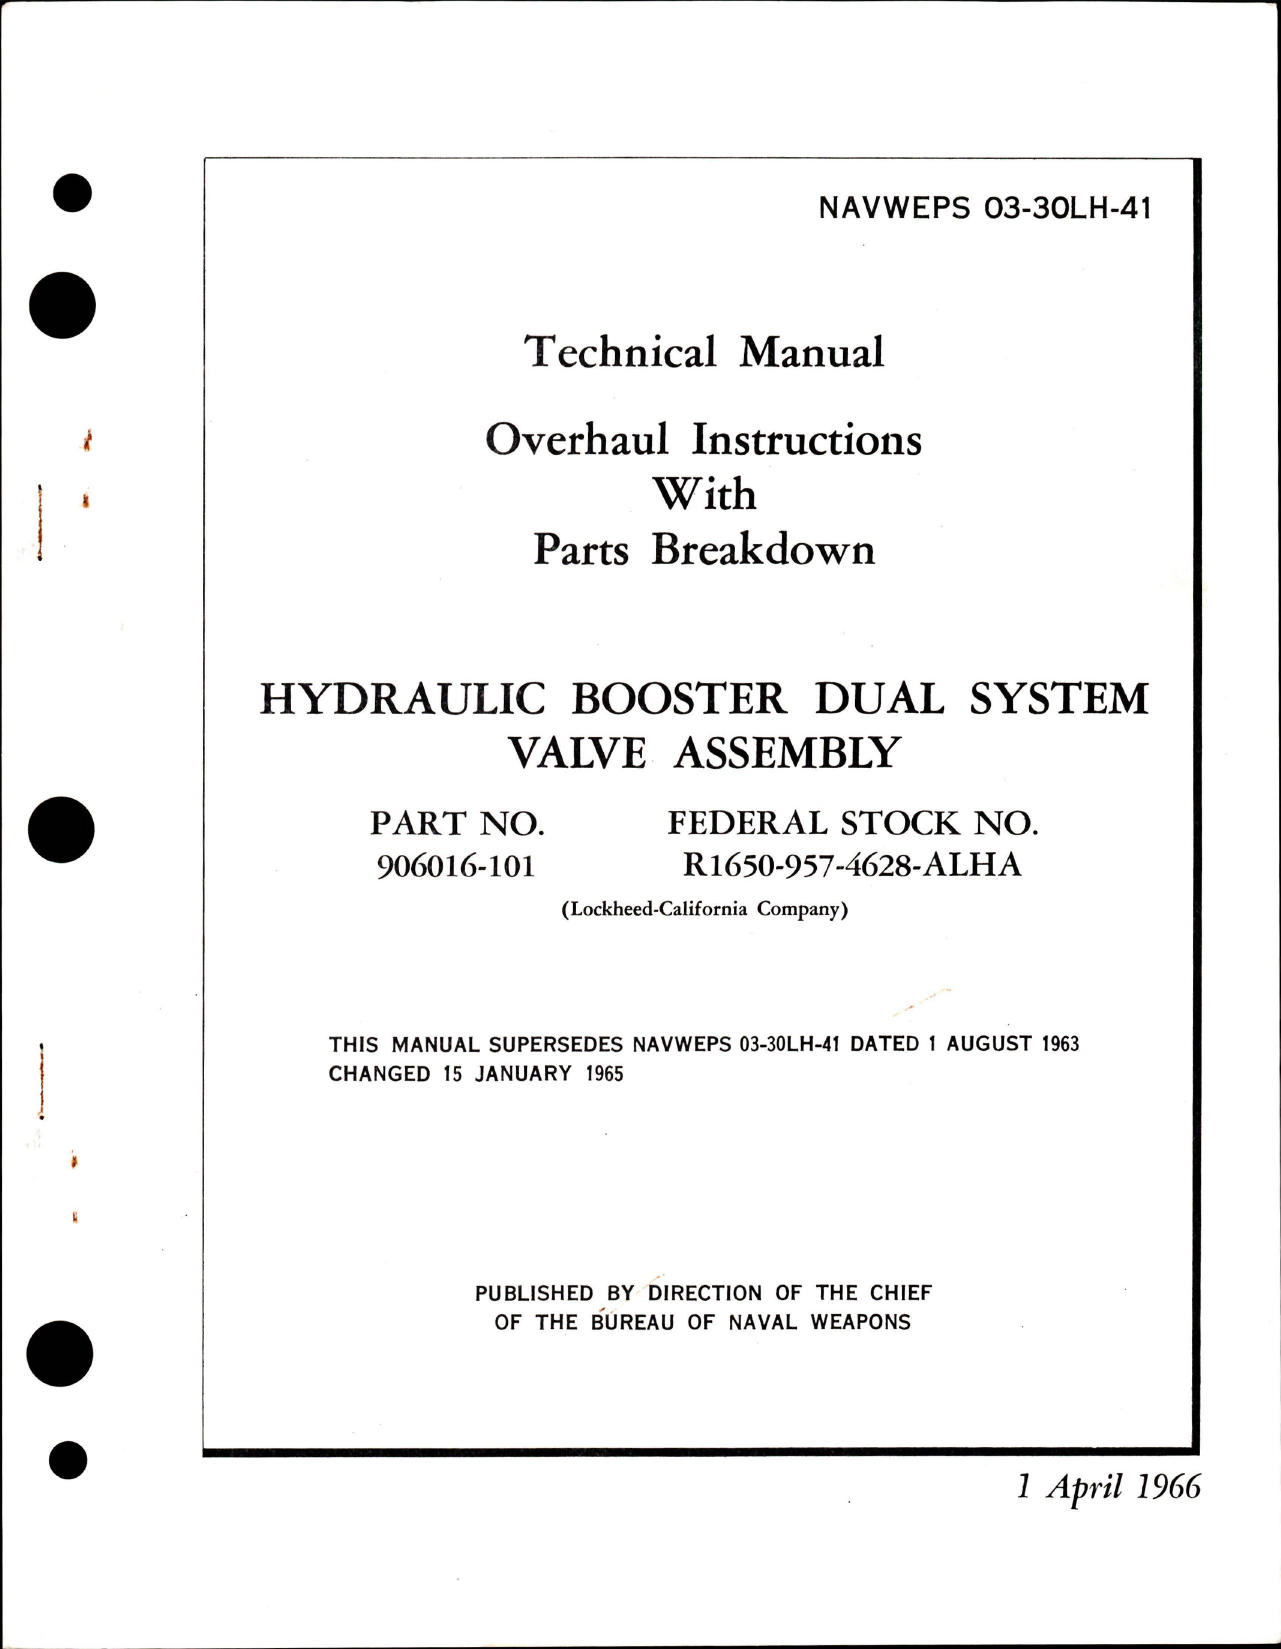 Sample page 1 from AirCorps Library document: Overhaul Instructions with Parts Breakdown for Hydraulic Booster Dual System Valve Assembly - Part 906016-101 